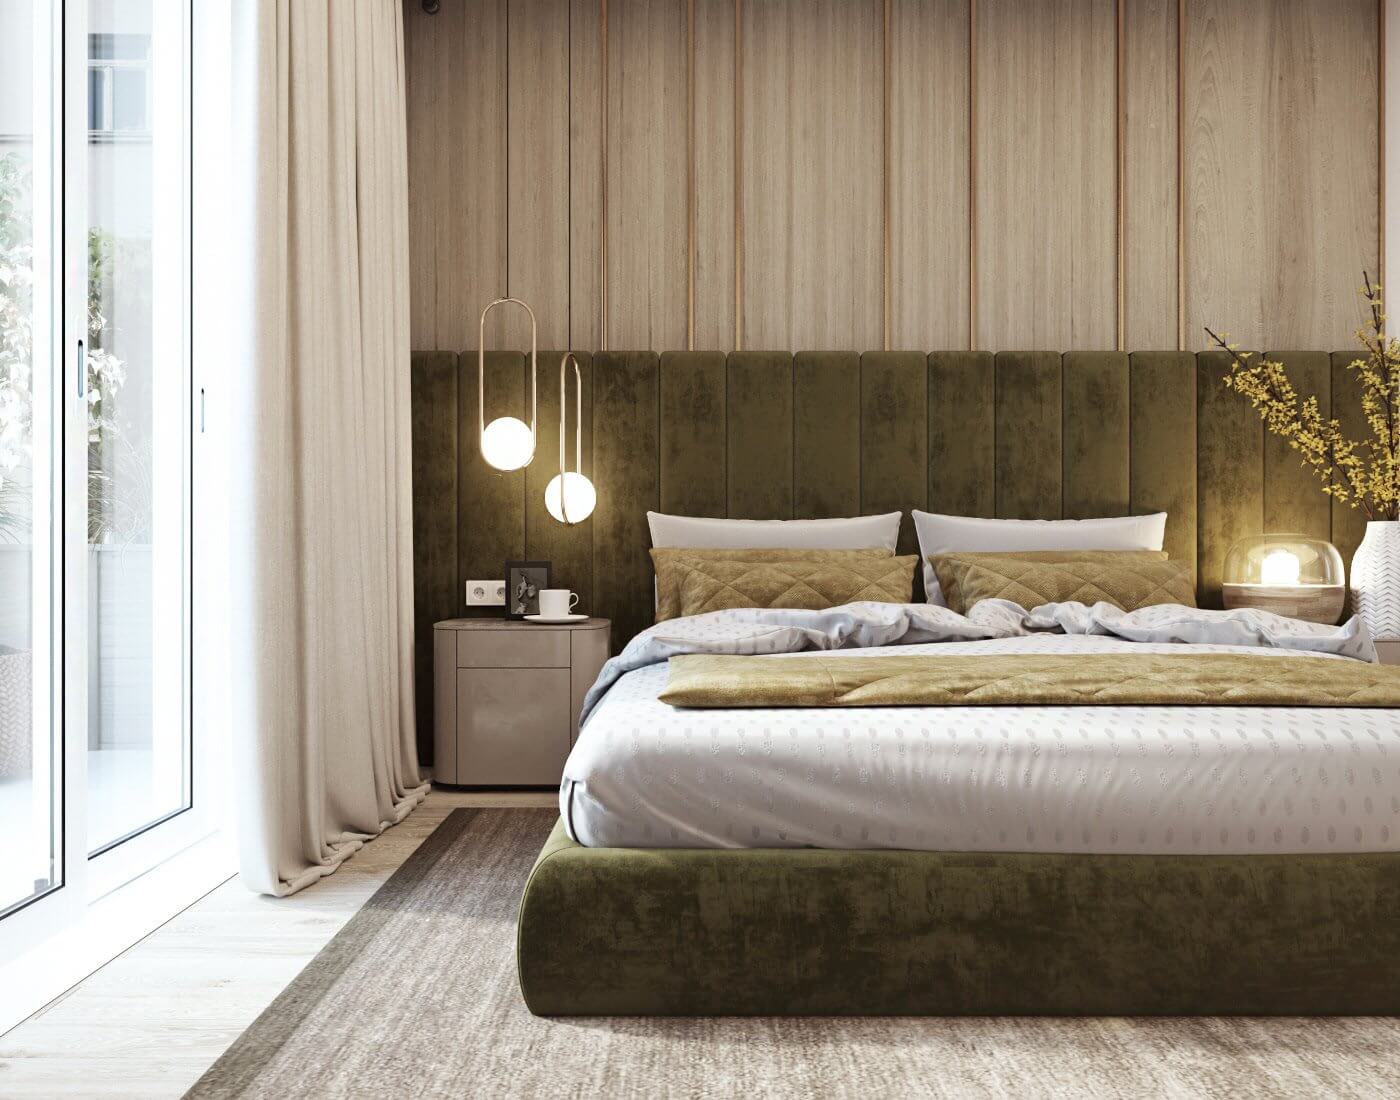 apartment in Milan for a lady bedroom bed - cgi visualization